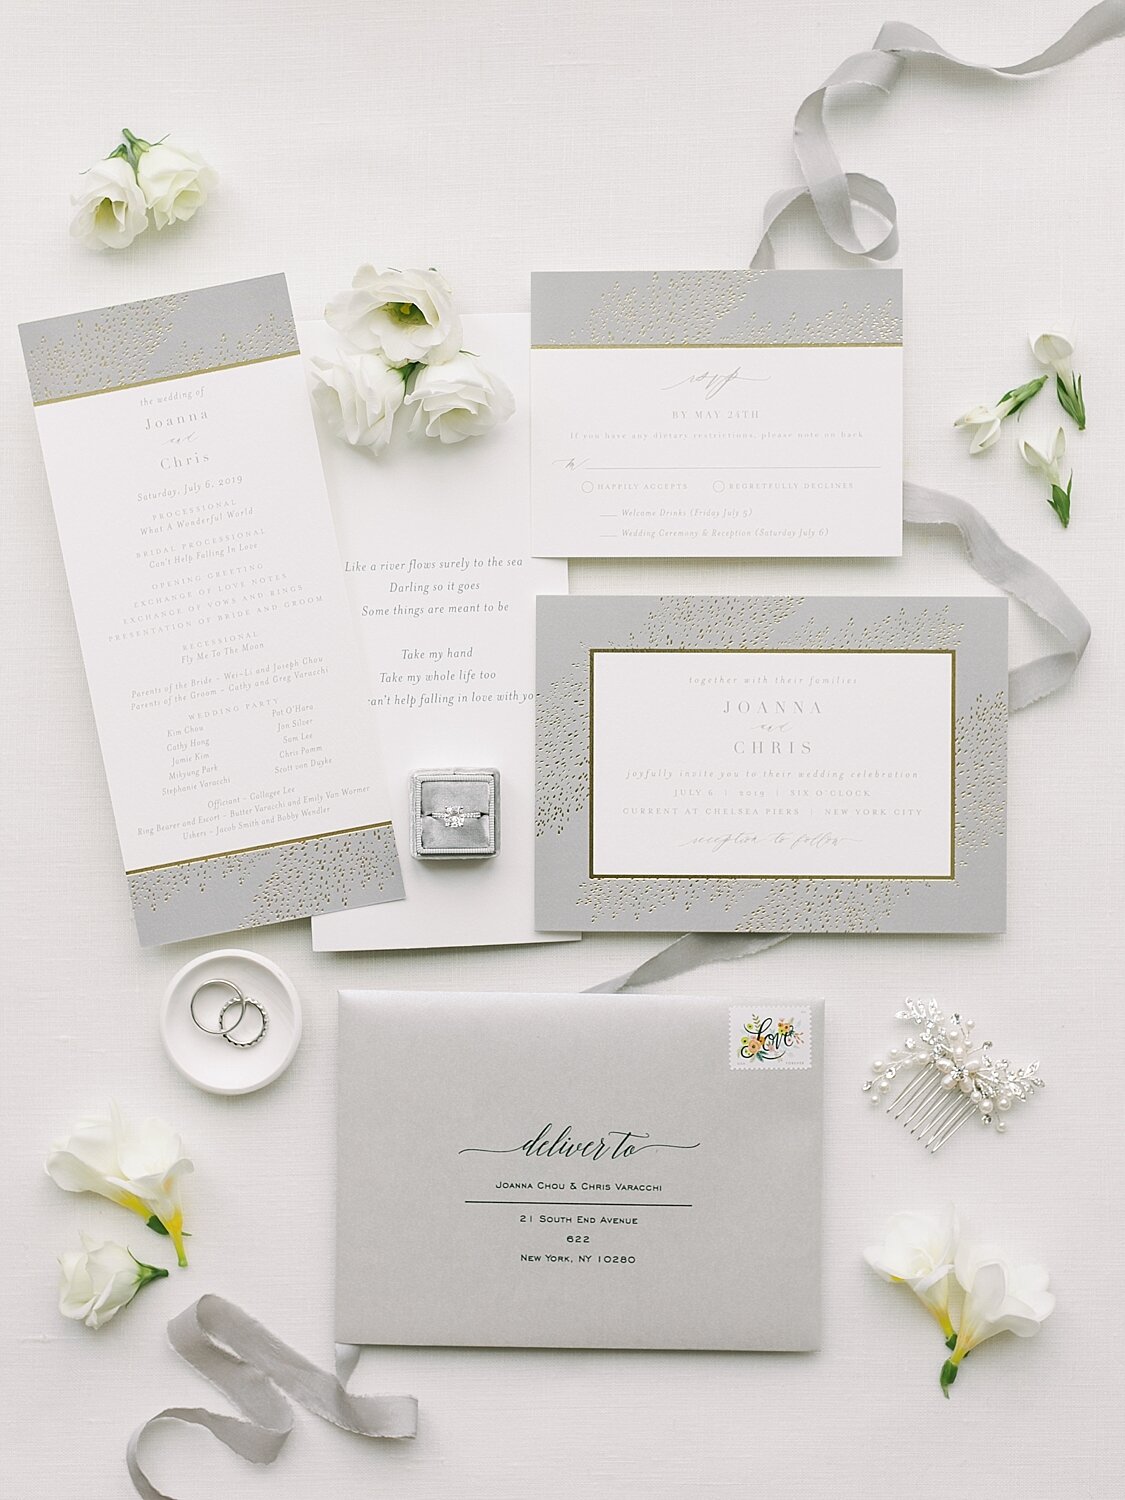 Gray white gold Minted wedding invitations